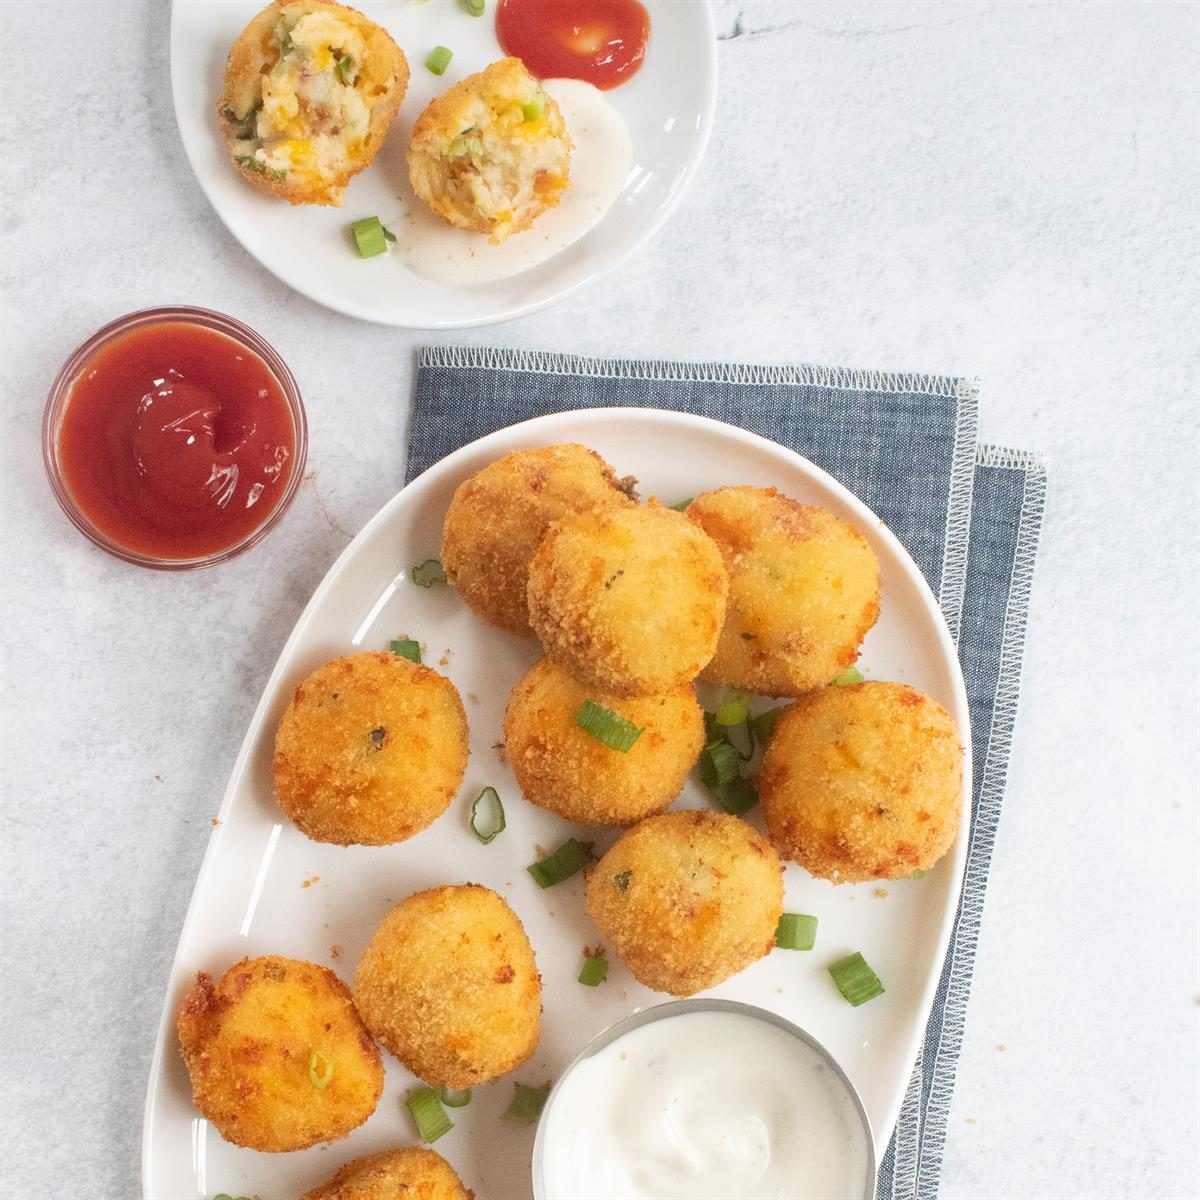 Fried Mashed Potato Balls Recipe: How to Make It | Taste of Home